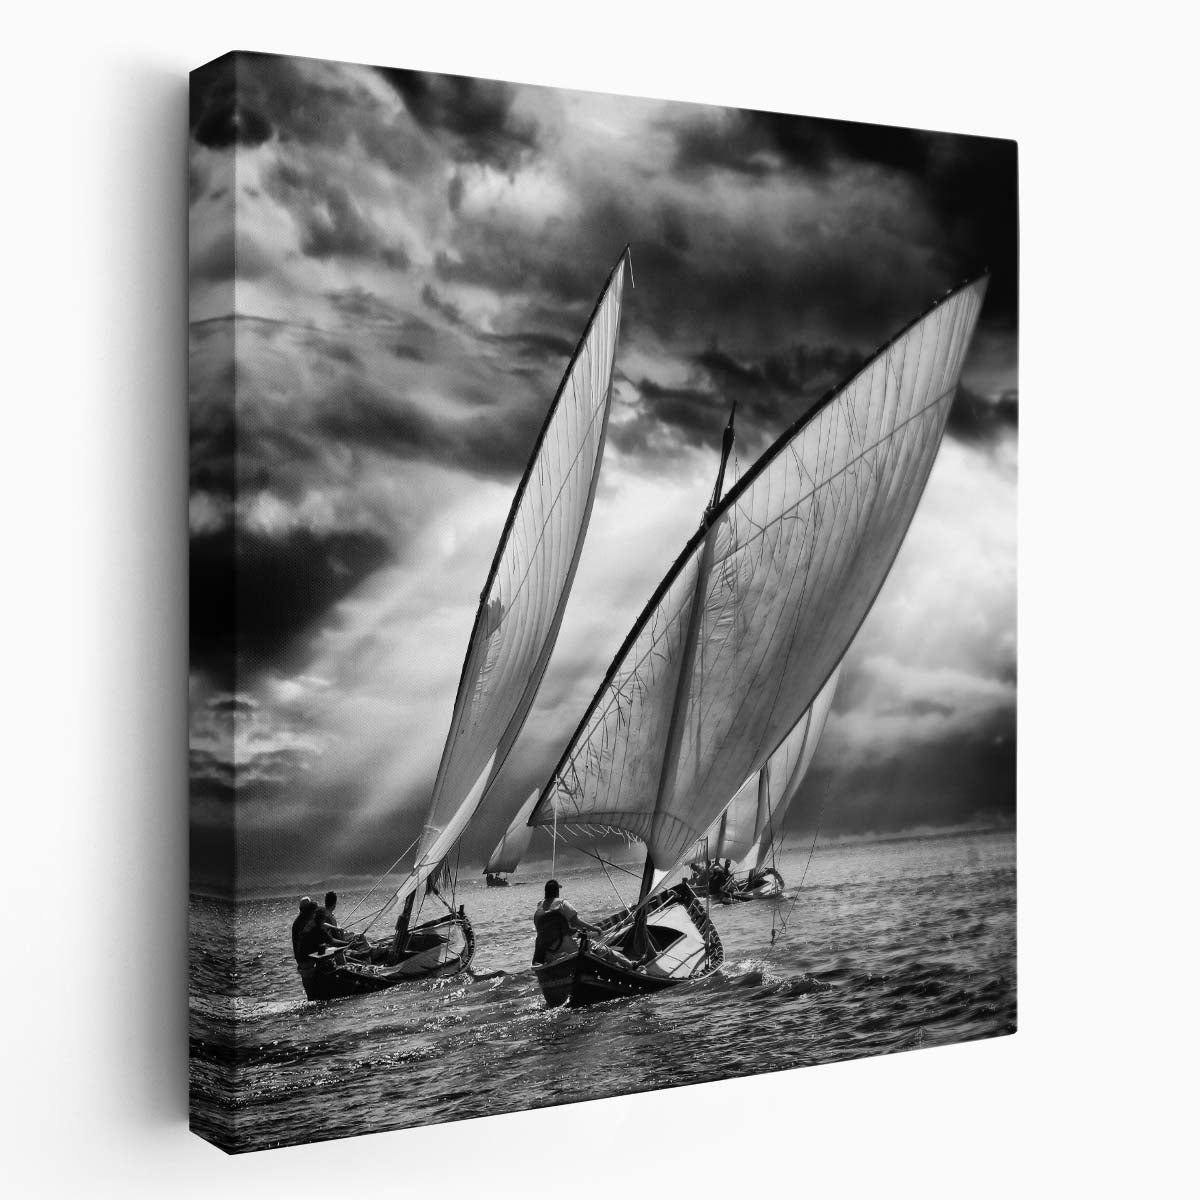 Monochrome Sailboat Race Seascape Ocean Photography Wall Art by Luxuriance Designs. Made in USA.